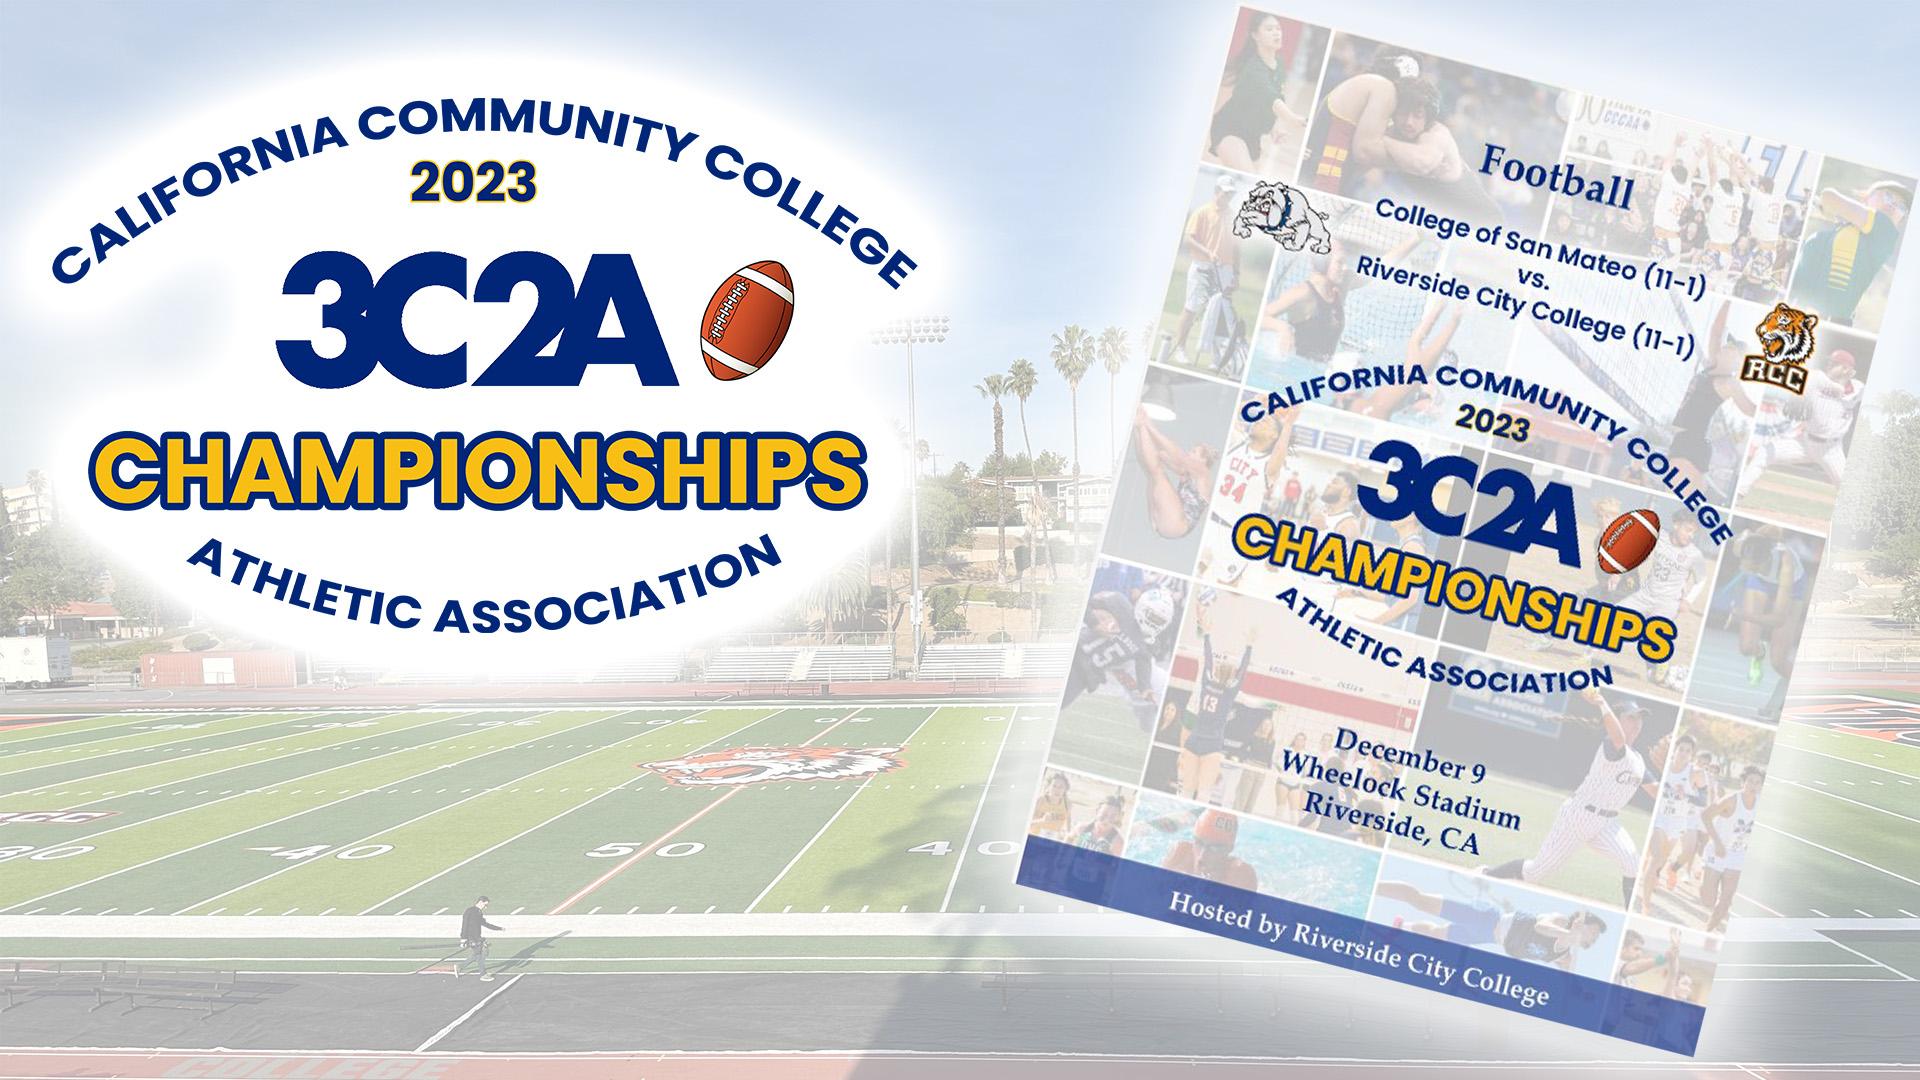 CSM and Riverside City set for rematch in 3C2A Football Championship